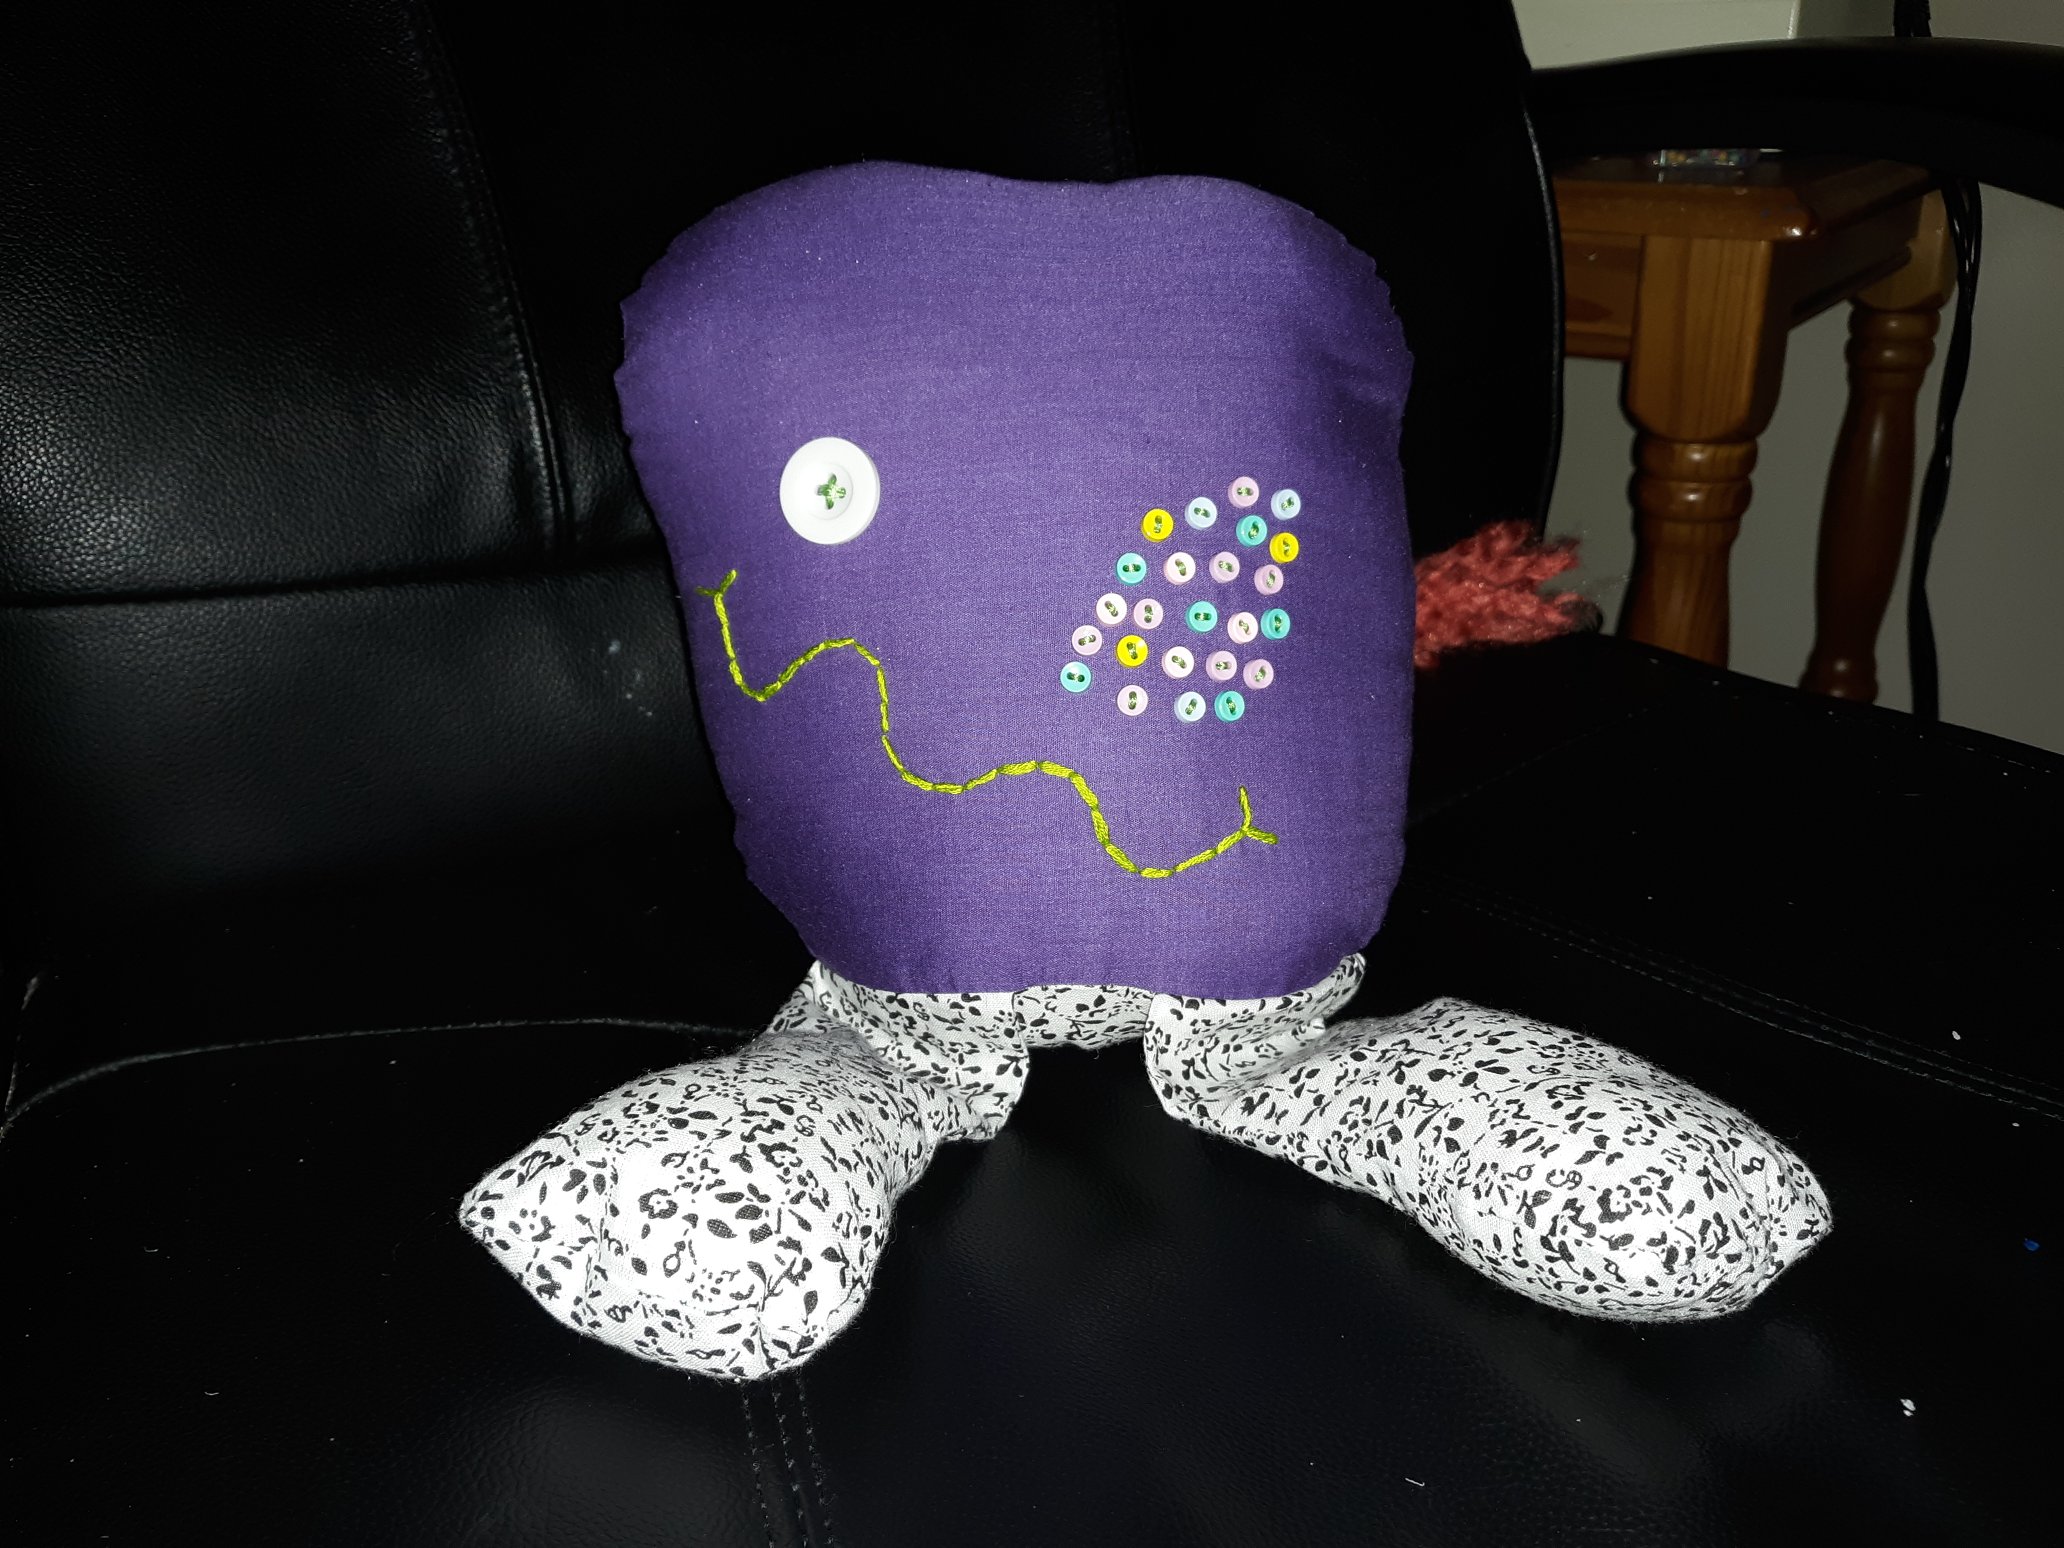 A very round purple doll with many eyes. It has one white button eye on the left of the face and many smaller button eyes on the right side of the face. The smaller button eyes are purple, pink, yellow, and blue. It has a wide squiggly green smile on its face. There are two legs coming out the bottom of it that are of a black and white floral pattern.